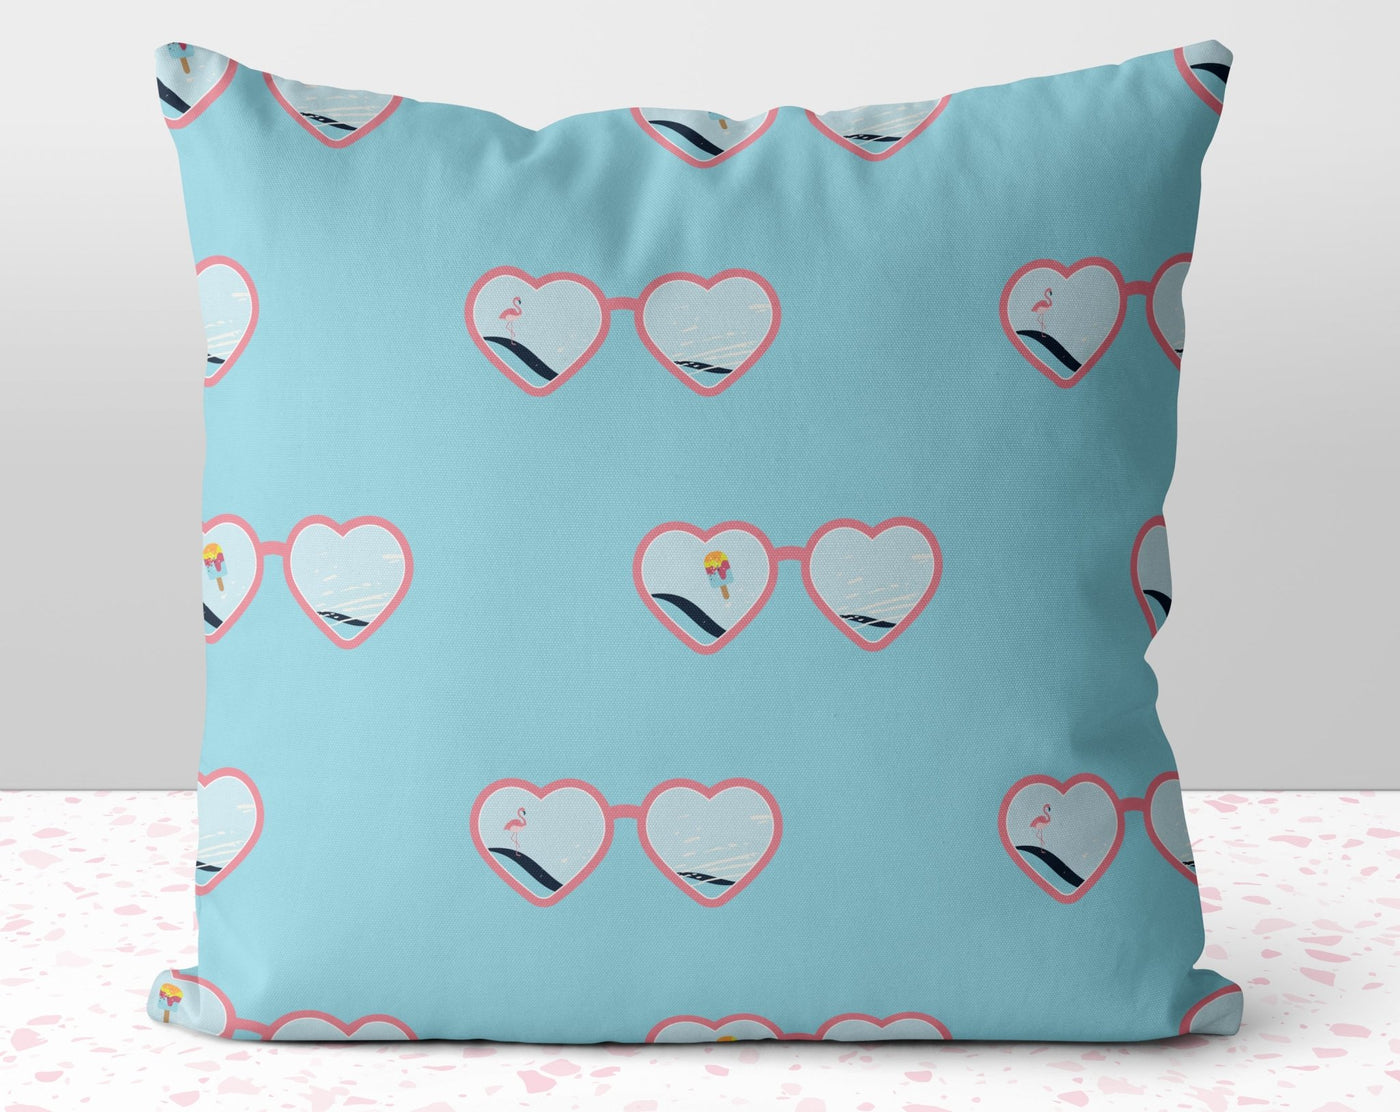 Heart Sunglasses Summer Fun Blue Square Pillow with Flamingo Popsicle Ocean Accents with Cover Throw with Insert - Cush Potato Pillows